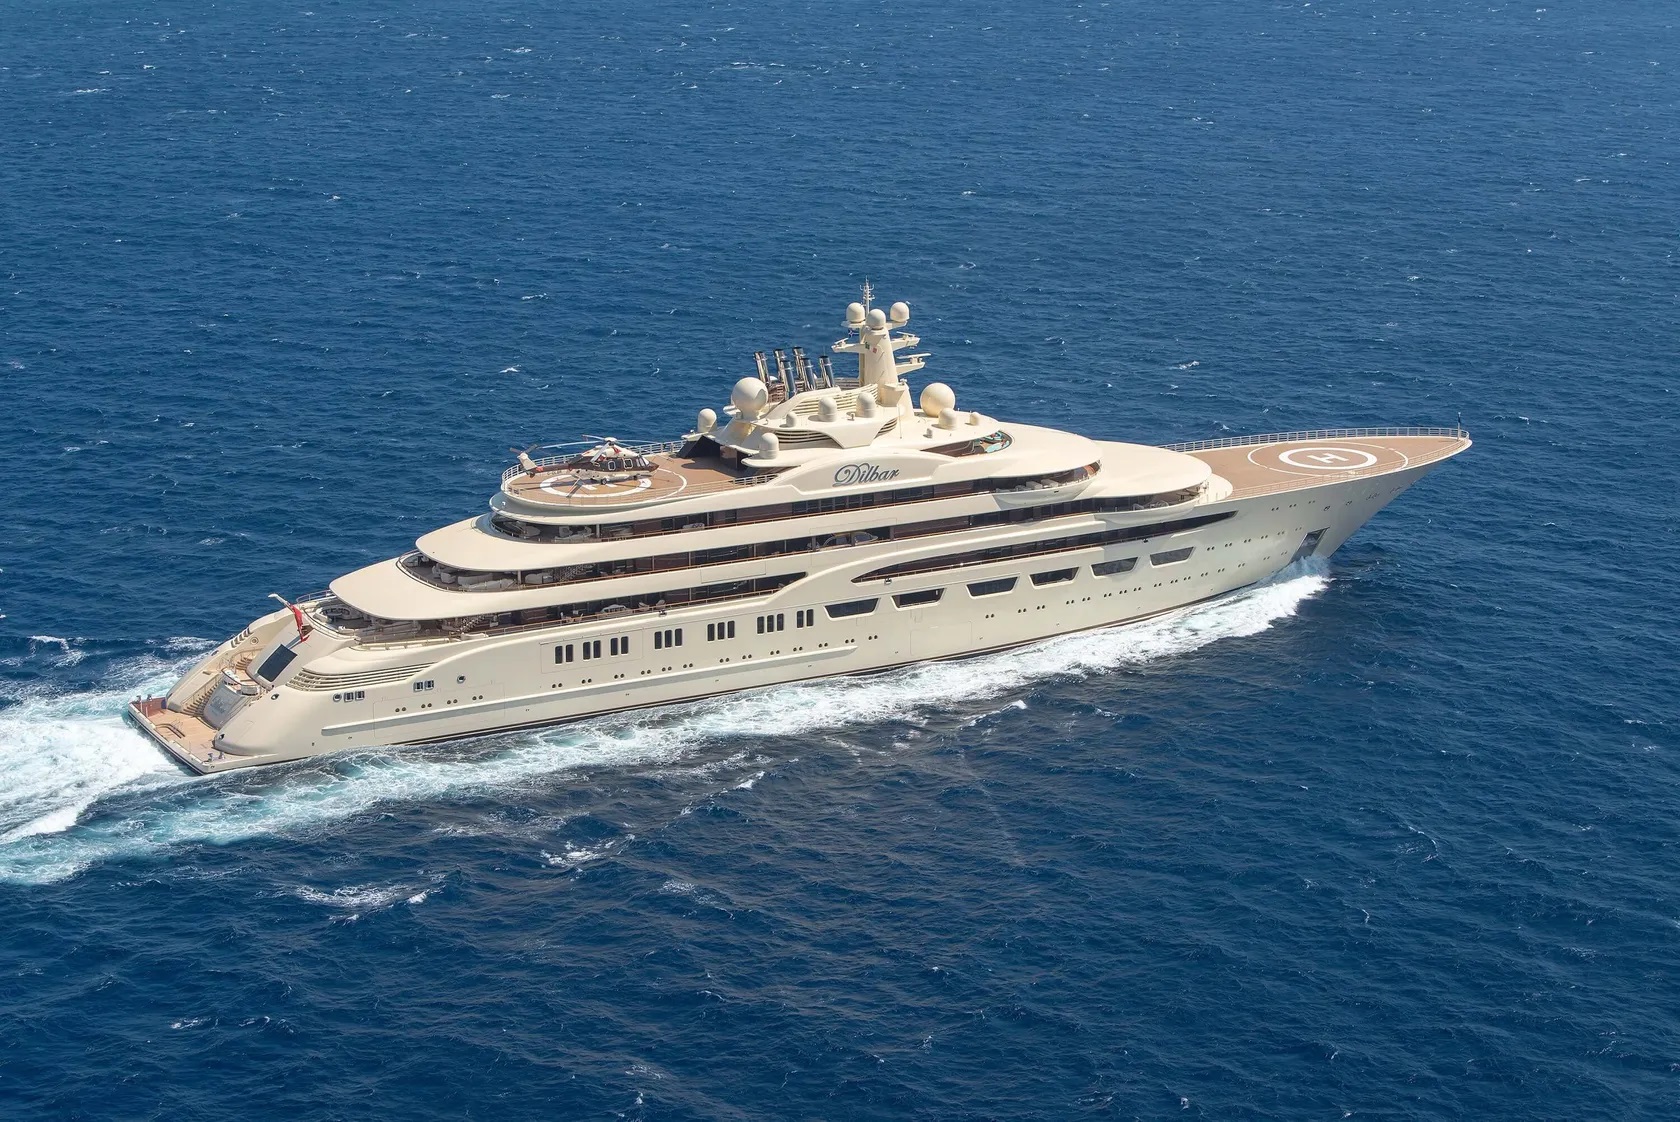 russian oligarch yachts for sale